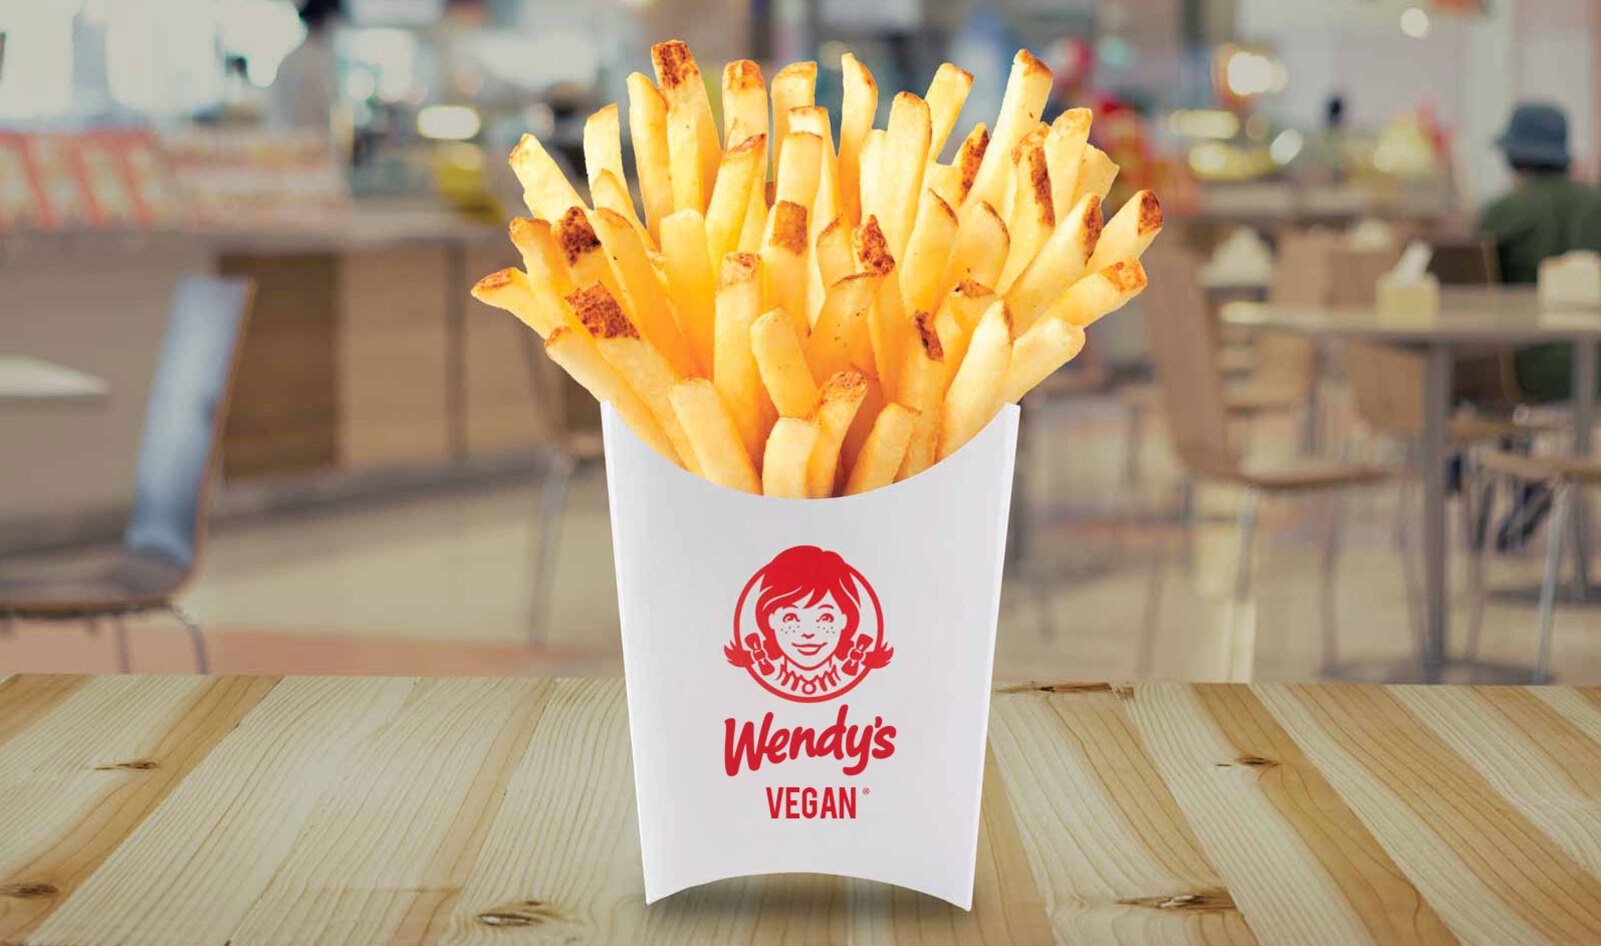 Wendy’s Announces Its First Fully Vegan Location—But There’s a Catch